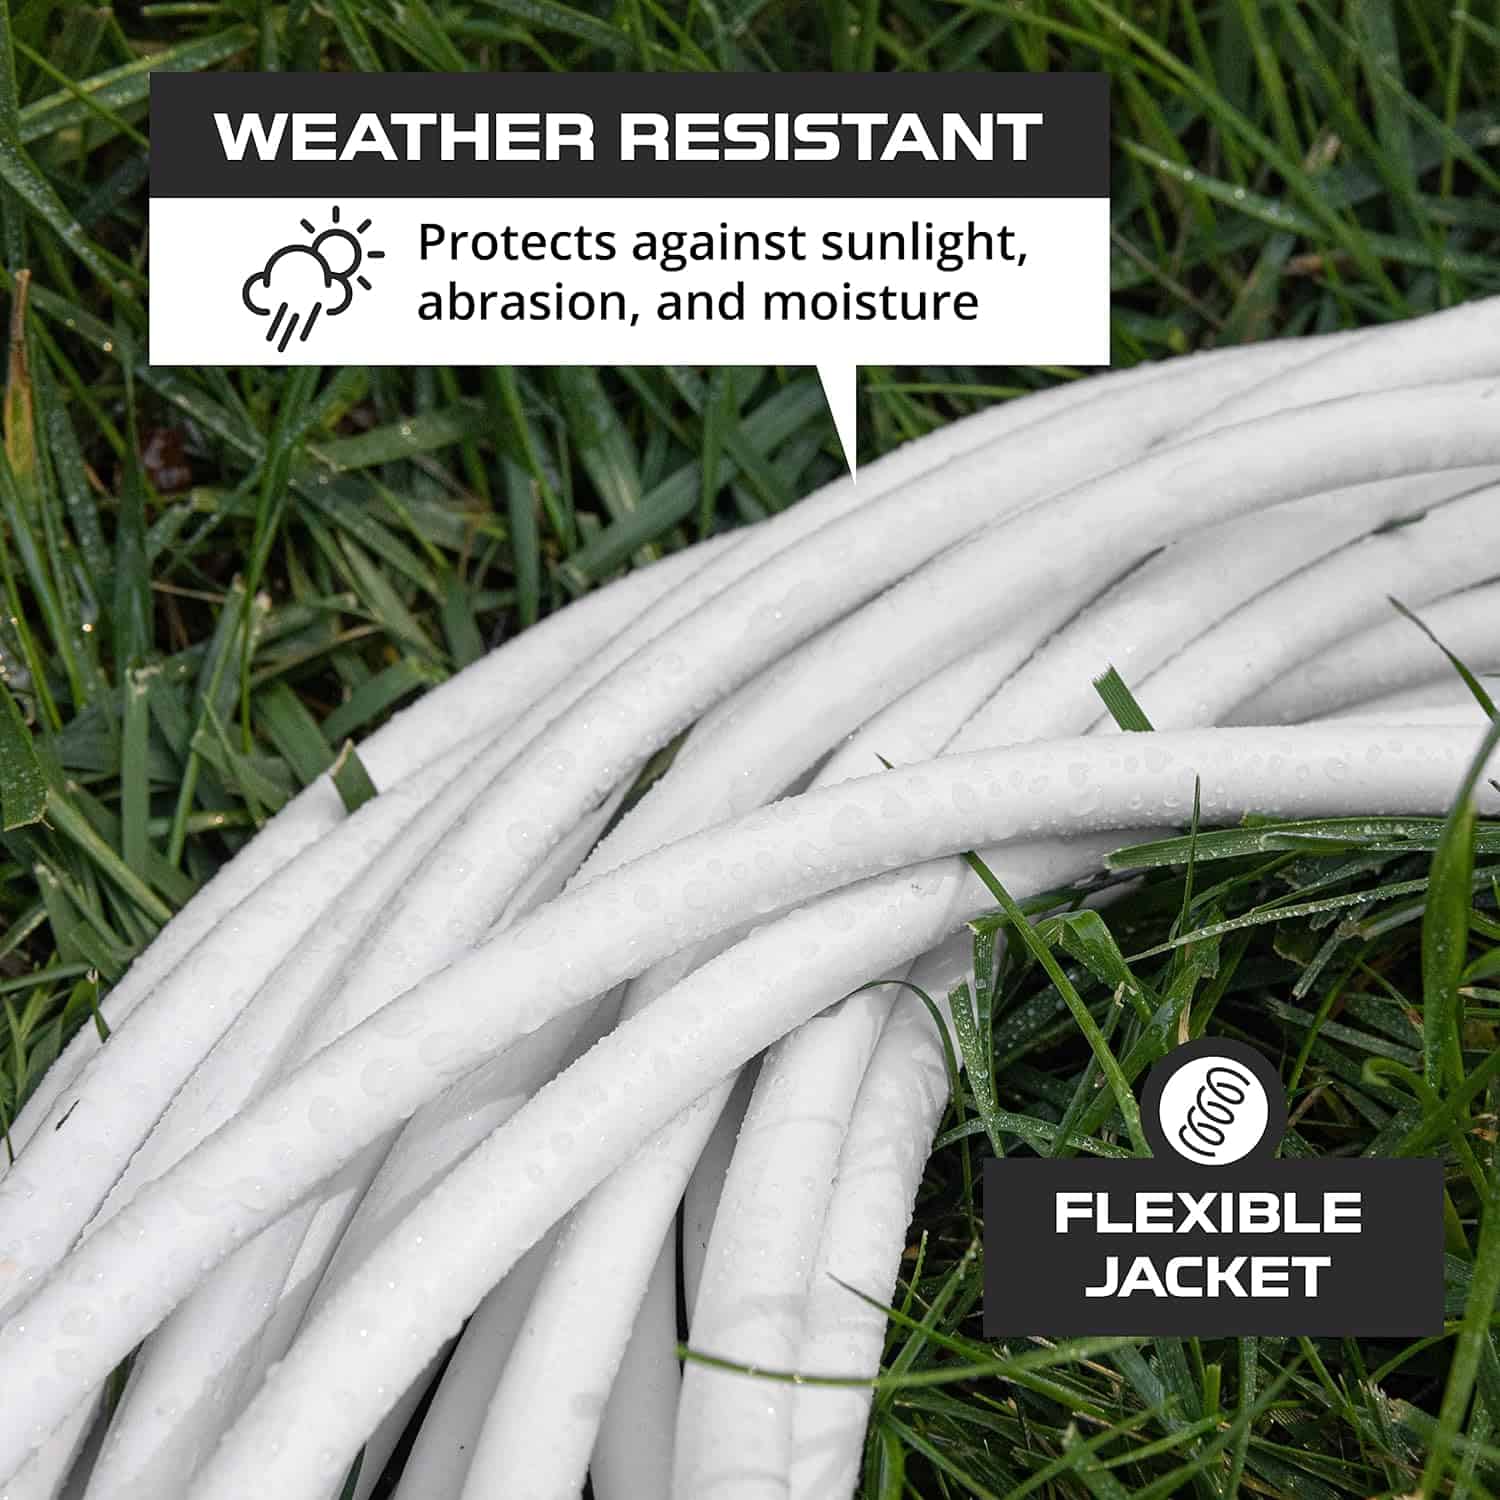 Iron Forge Cable White Extension Cord 10 Foot 3 Prong, 2 Pack, 16 3 Weatherproof Indoor & Outdoor Extension Cord 10 ft, White Electrical Power Cable for Home Office, Lights Decoration – 13 Amp SJTW 3